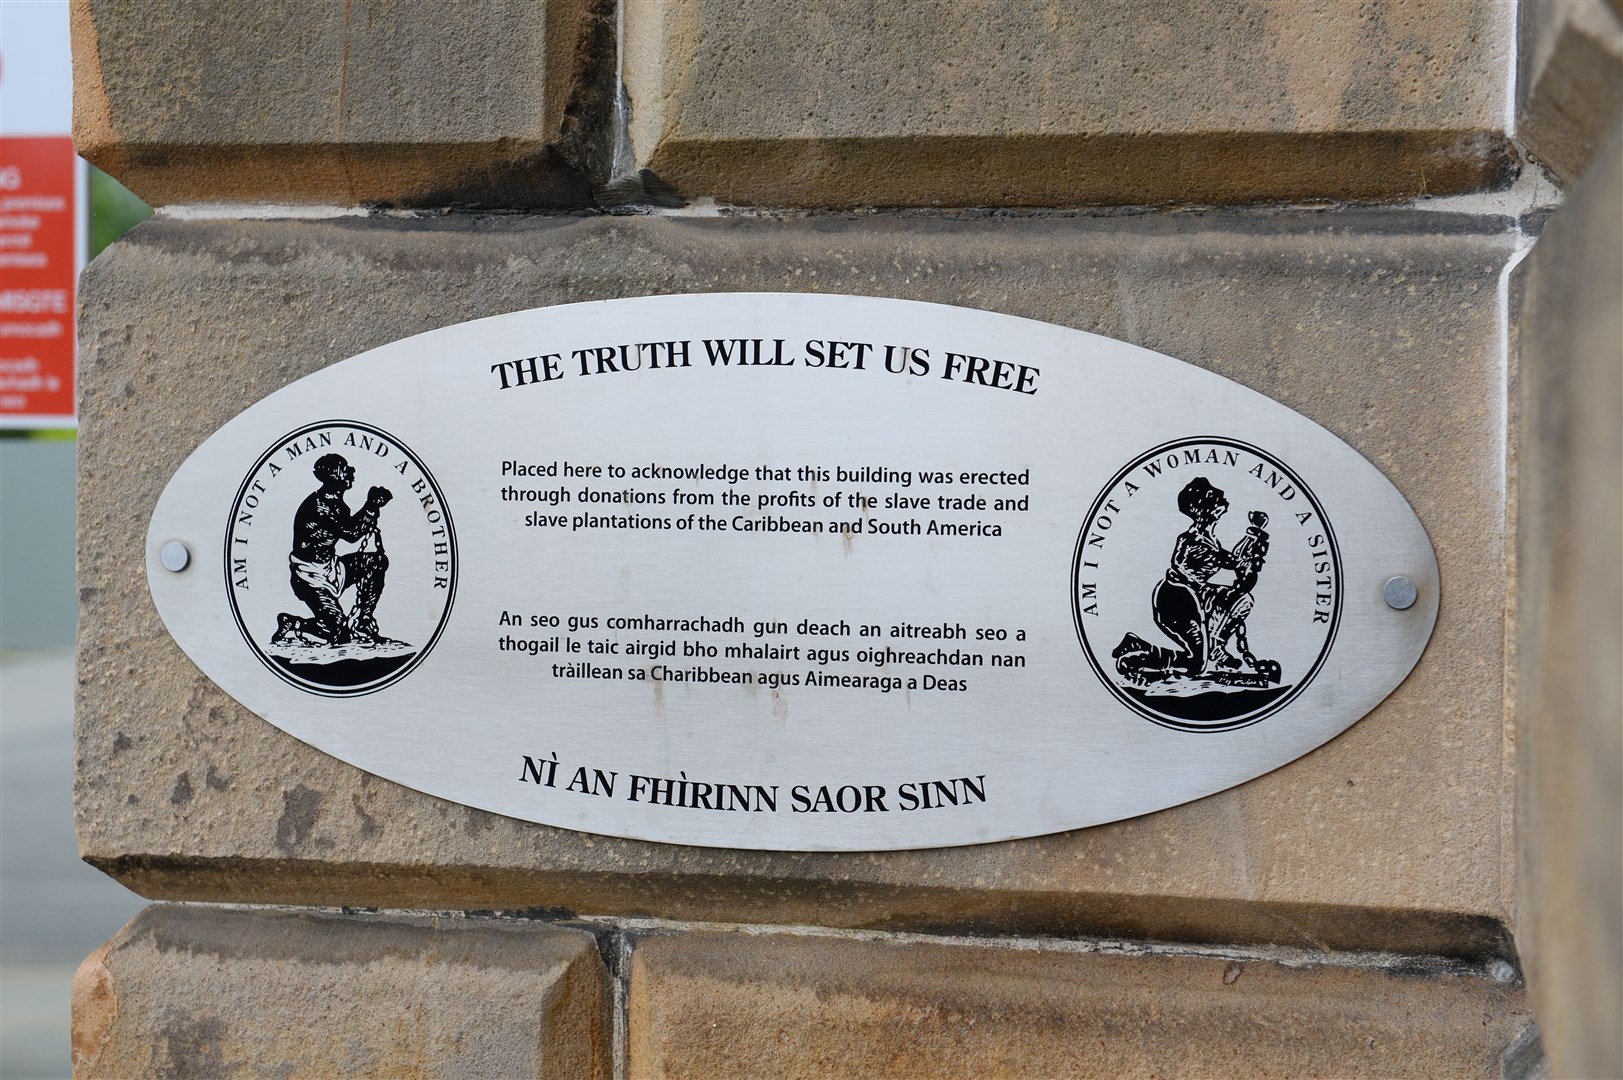 A plaque at UHI headquarters makes the building's links to slavery clear.